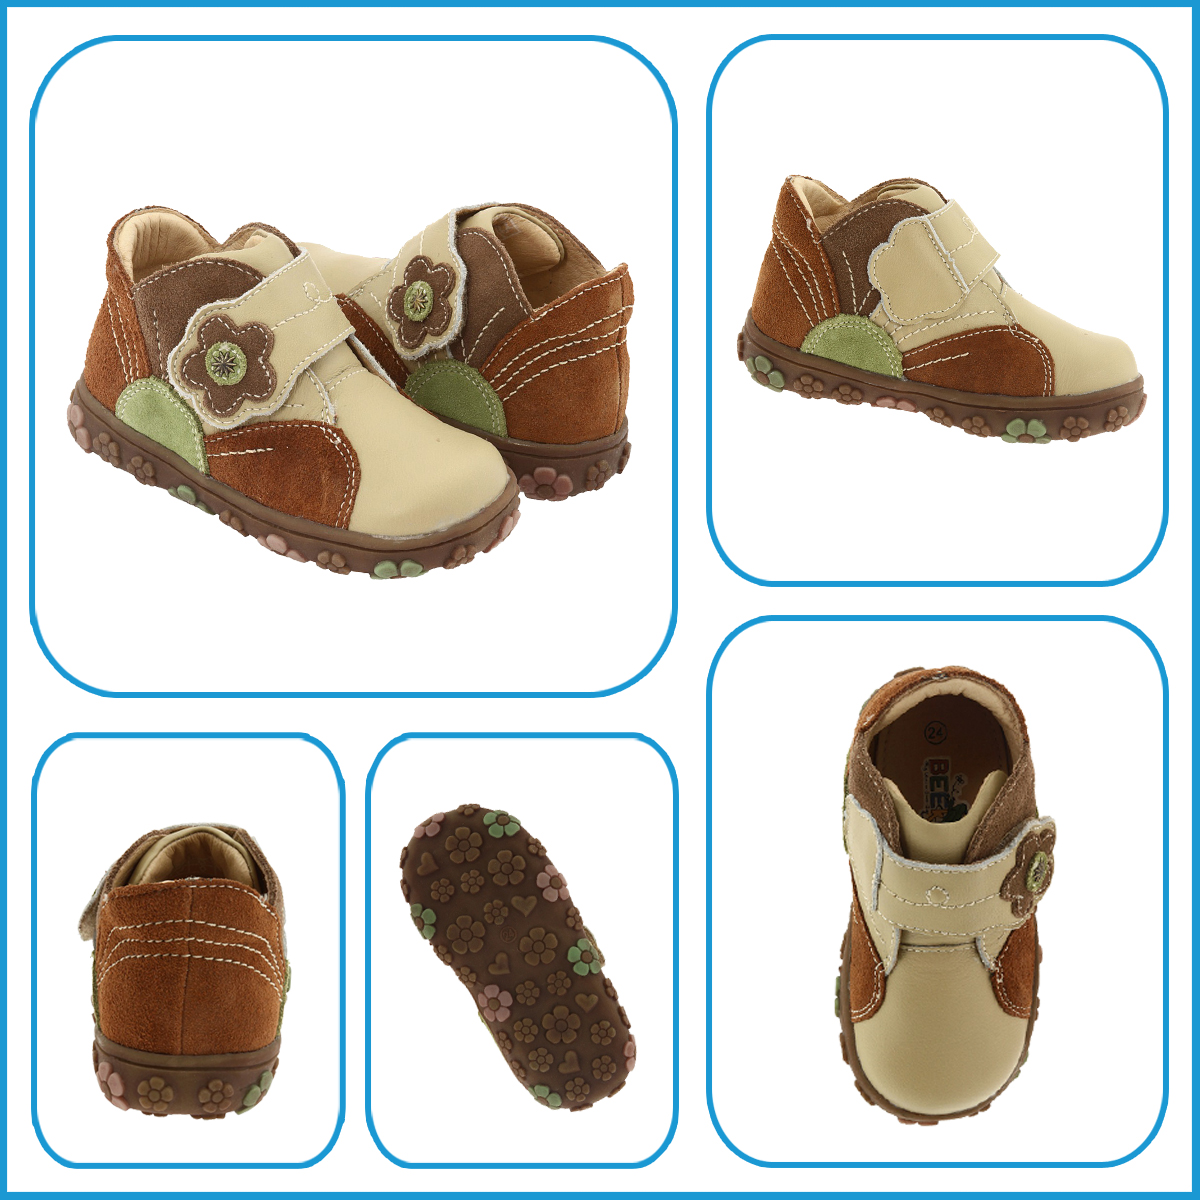 New fashion style hot selling high quality lovely baby prewalker shoes crochet fancy girl dress shoes for kids